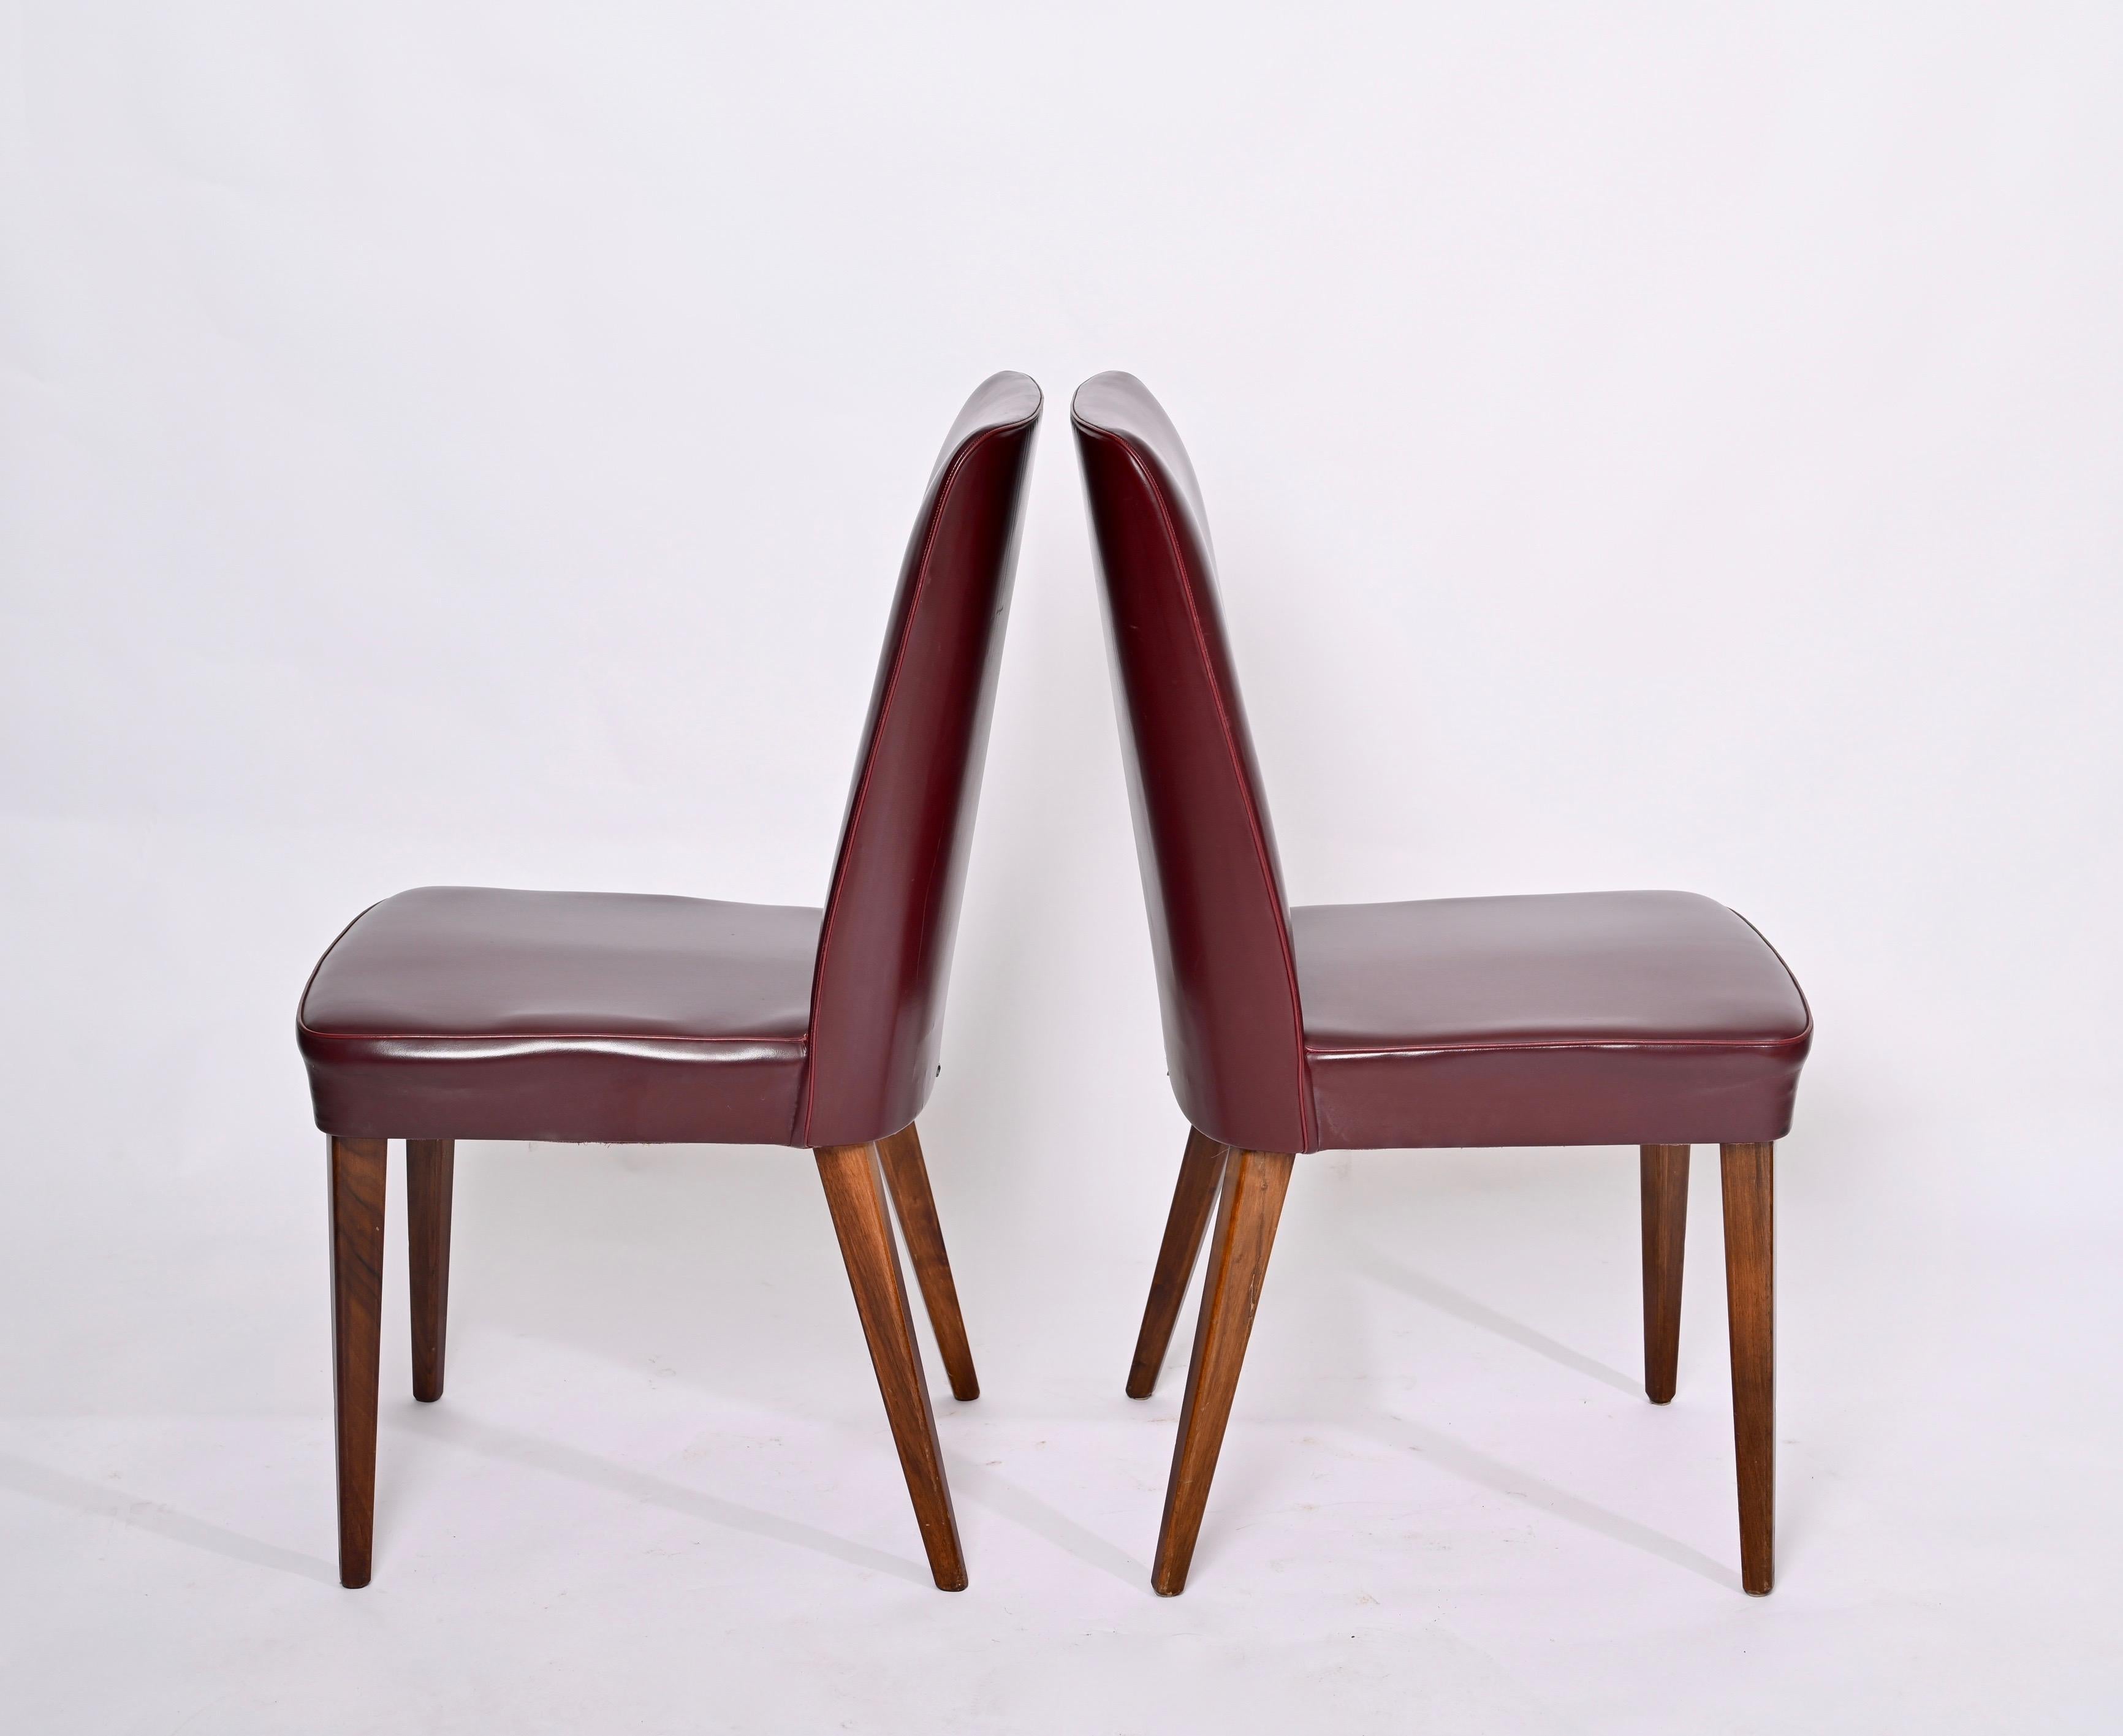 Pair of Bordeaux Leather Chairs by Anonima Castelli, Italy, 1950s For Sale 1